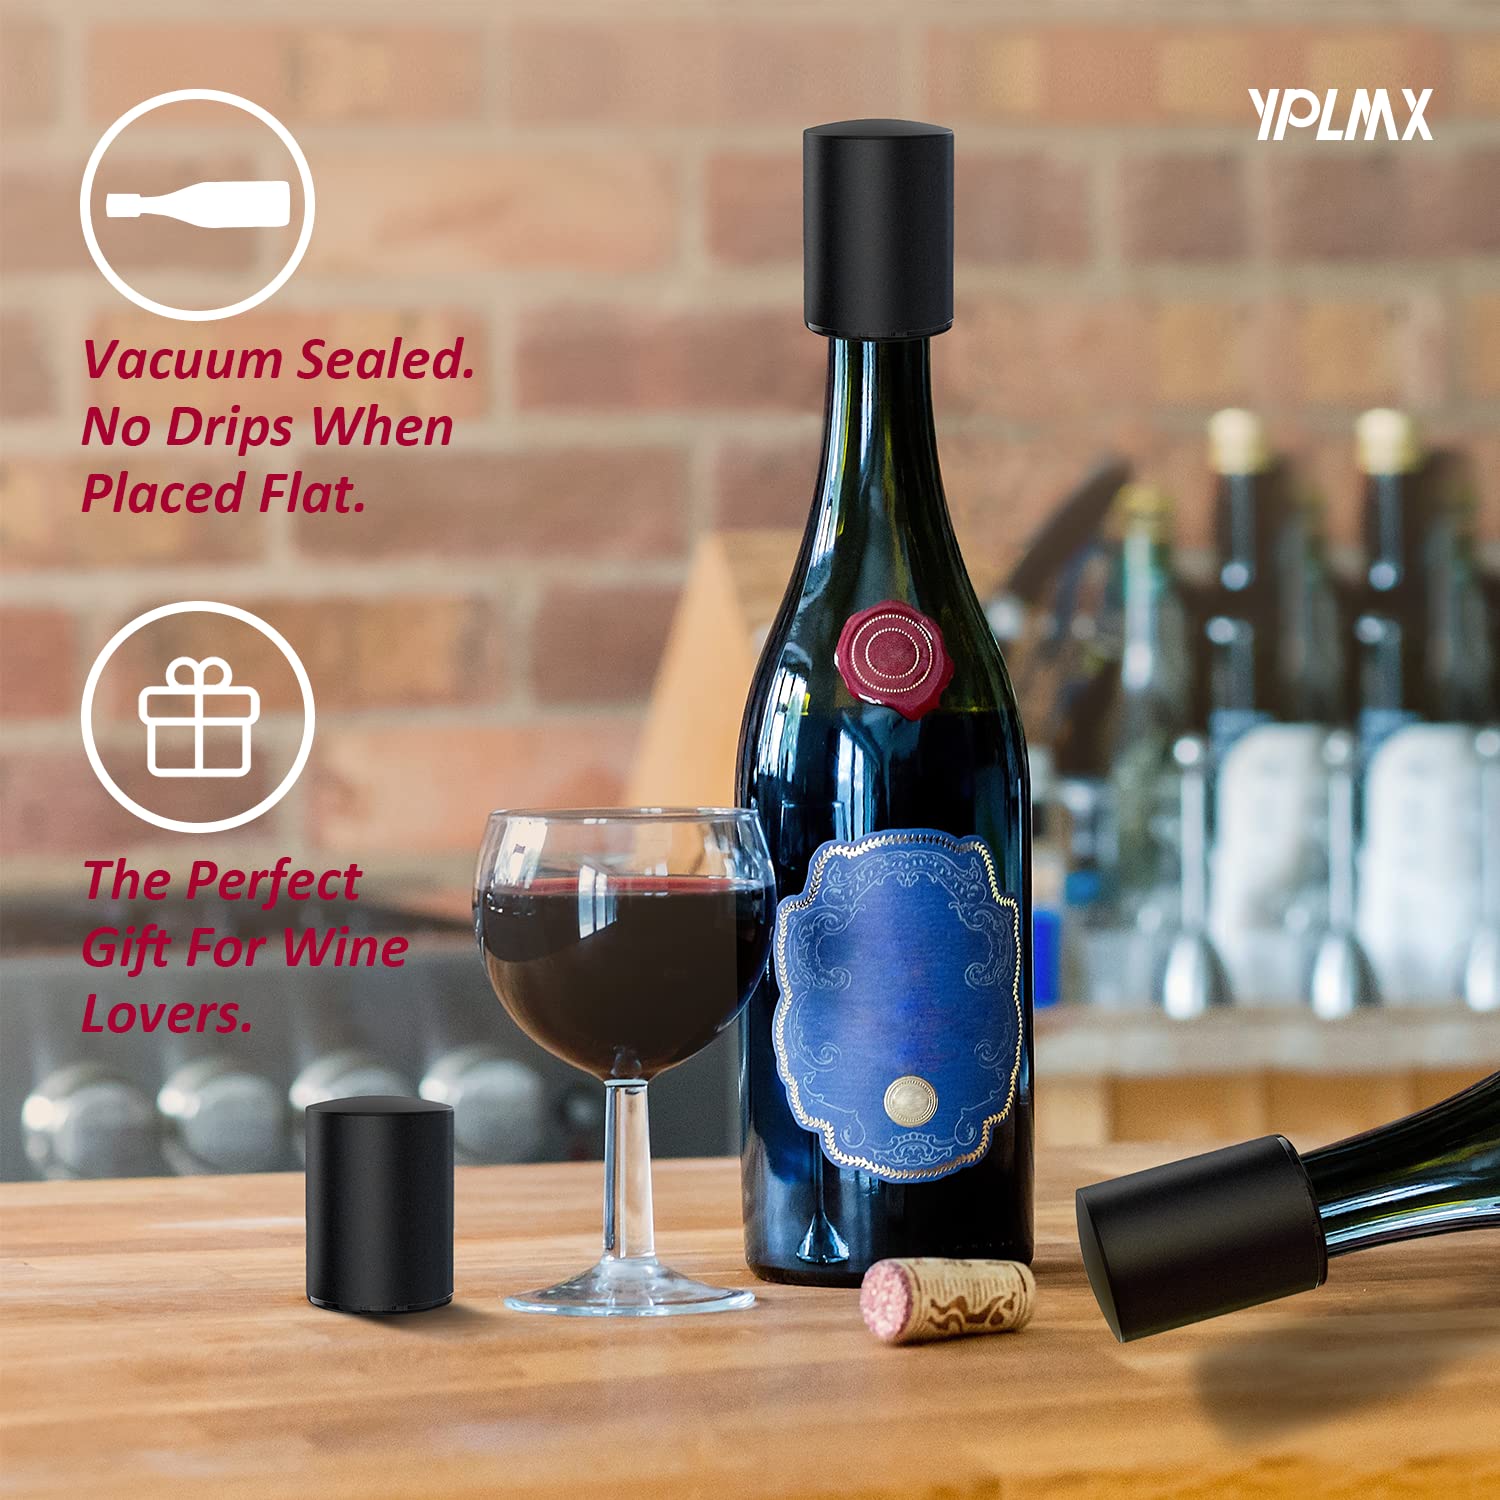 [2-Pack] YPLMX Vacuum Wine Bottle Stopper. The Built-In Vacuum Pump Sucks Air Away And Keeps The Wine Fresh. High-End Stoppers Can Be Reused. The Best Gift For Wine Lovers (Black)